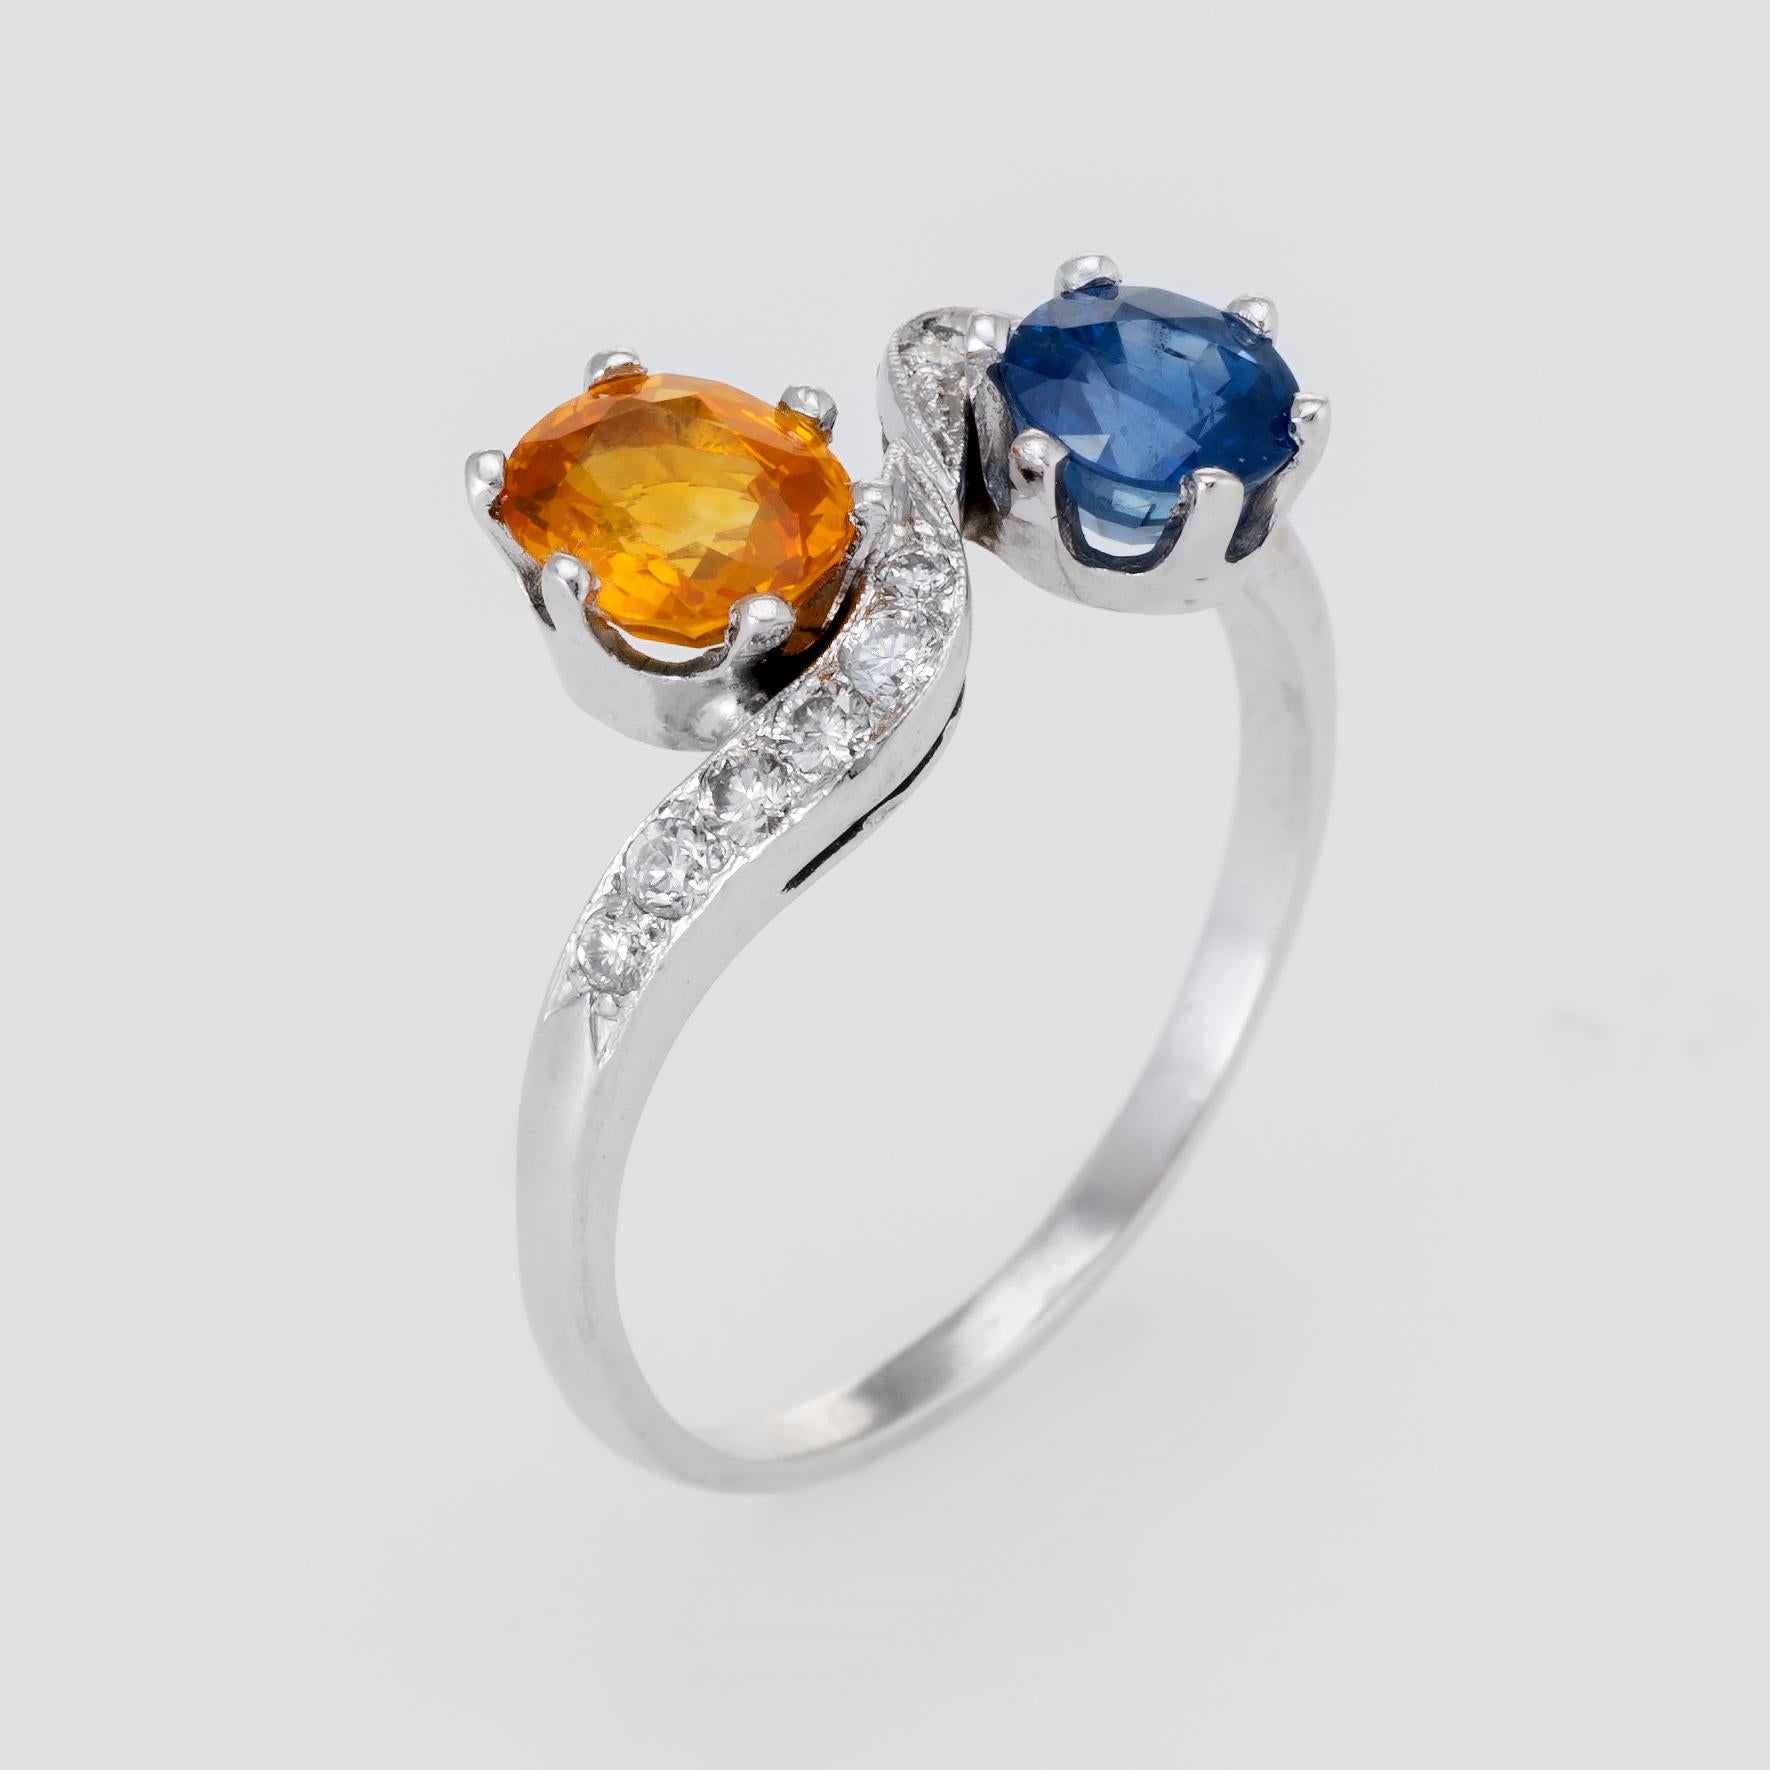 Elegant vintage bypass ring (circa 1950s to 1960s), crafted in 18 karat white gold. 

One round mixed cut Natural Sapphire, approx. 0.90 carats (5.5 x 3.7mm), dark blue color, moderately included, good cut, Sri Lanka origin, heated. One oval mixed